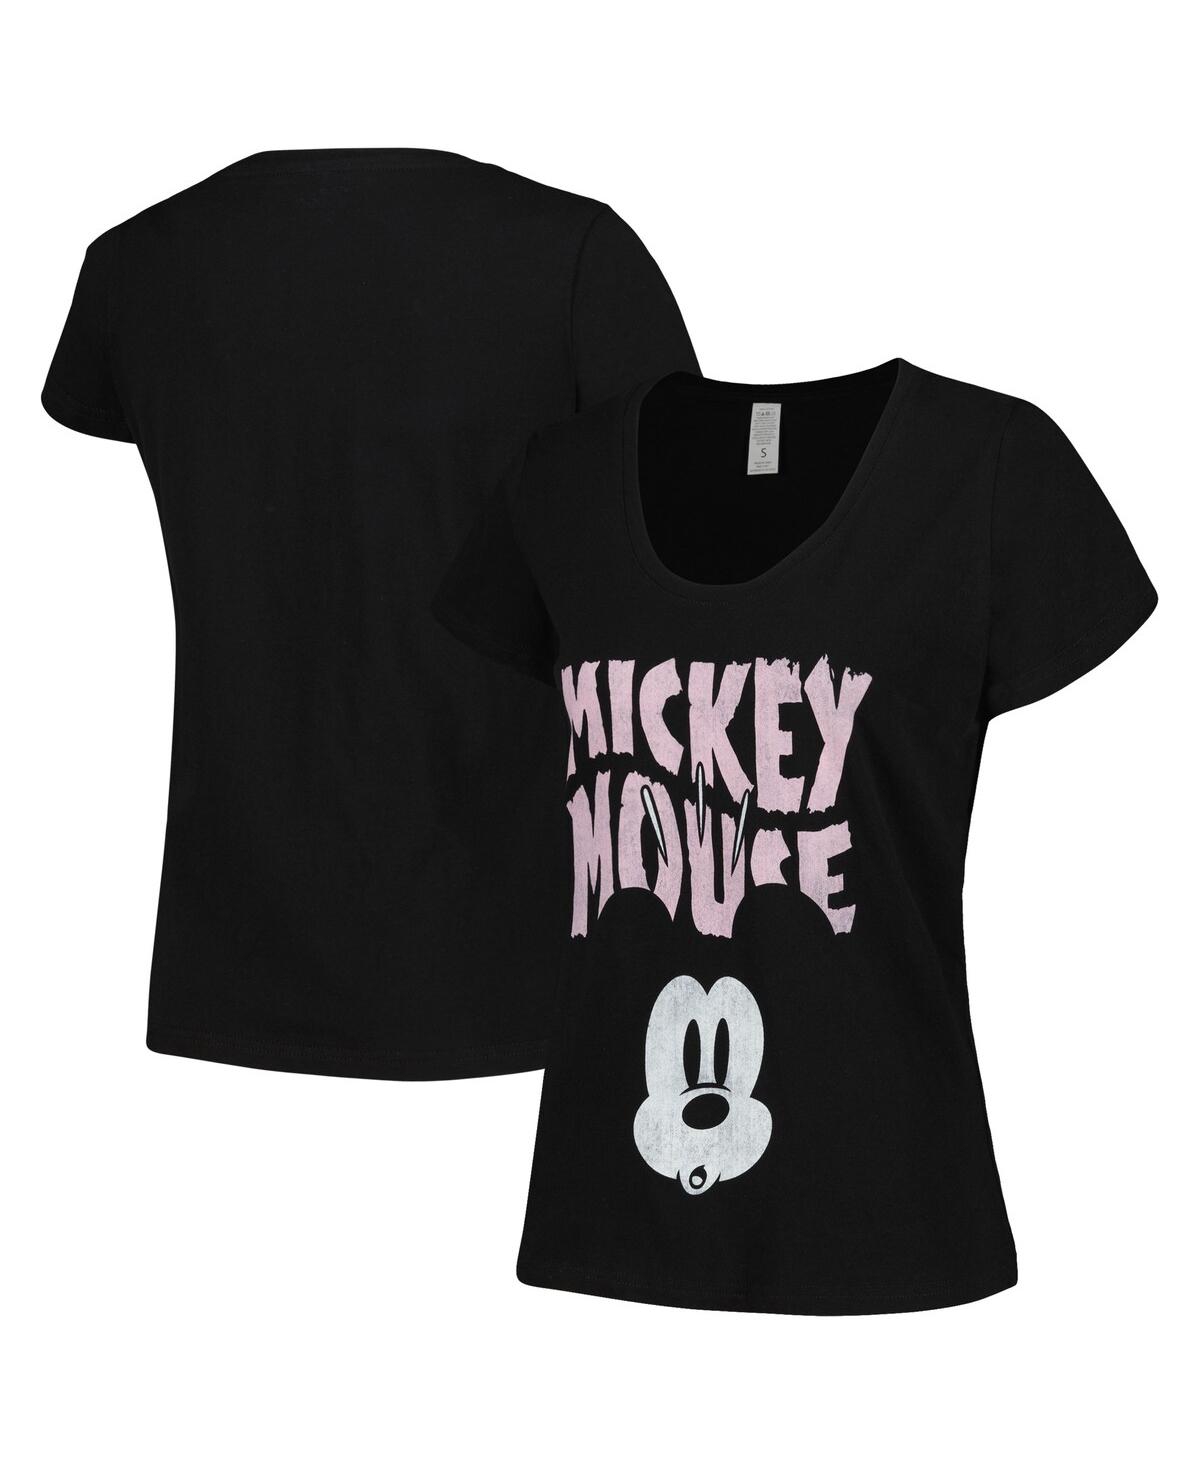 Women's Mad Engine Black Distressed Mickey Mouse Face Scoop Neck T-shirt - Black